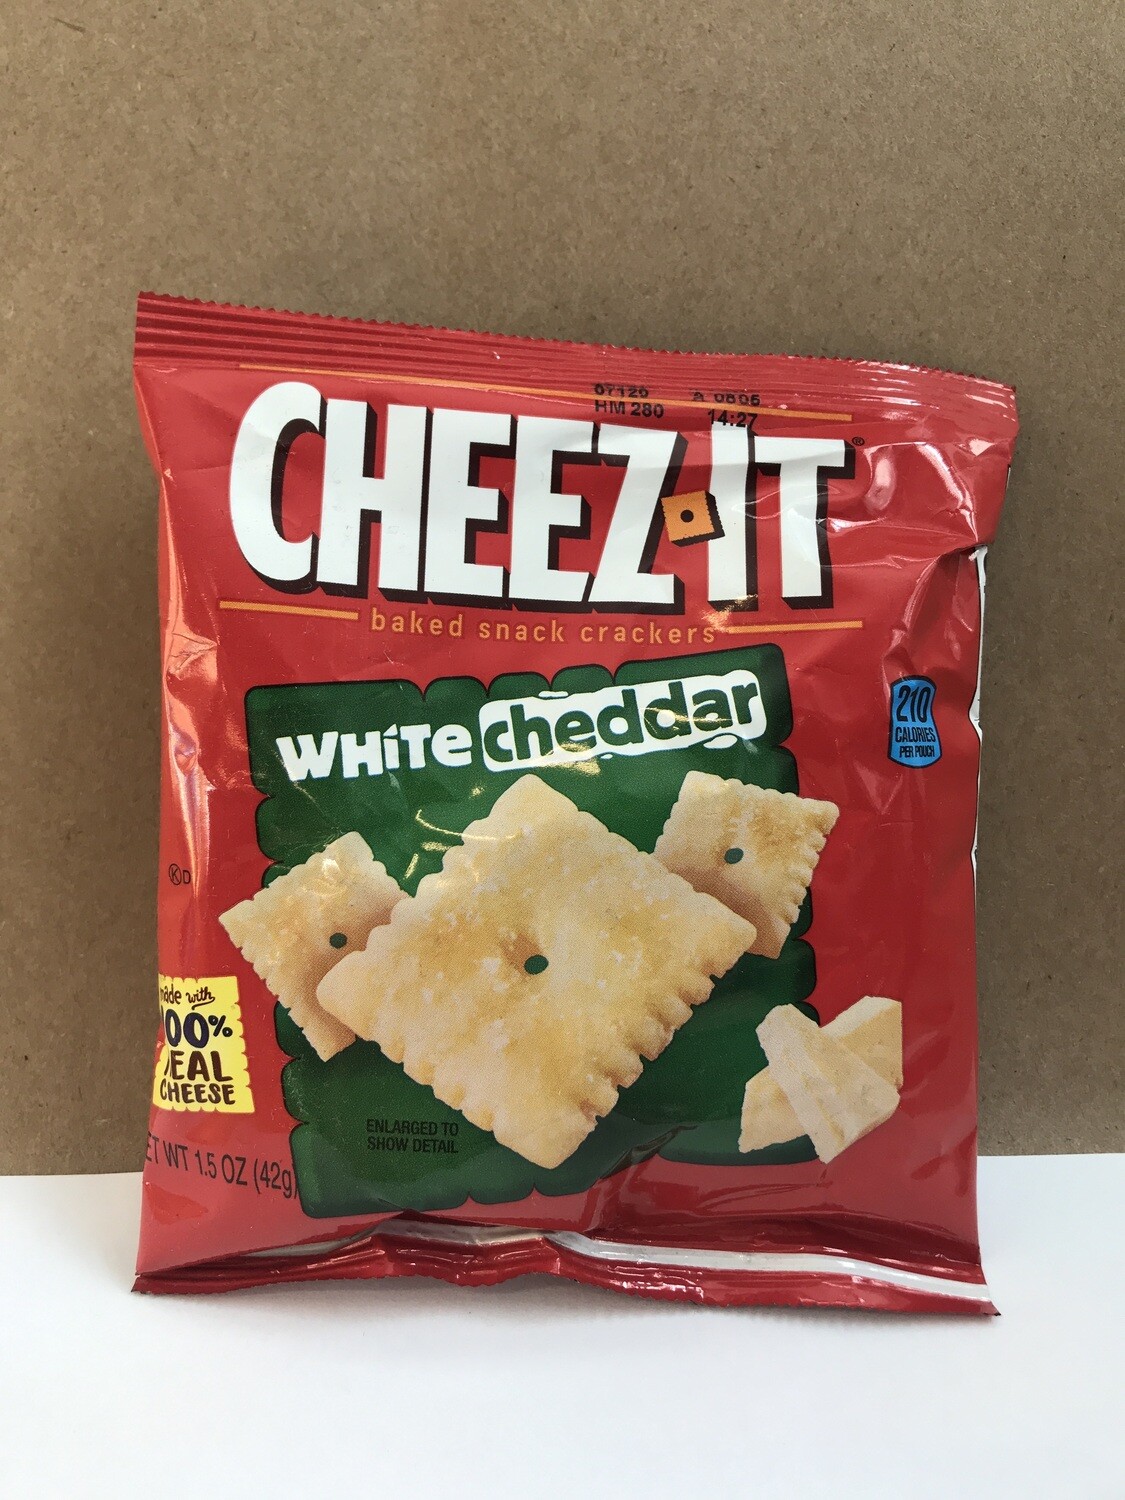 Chips / Mini Bag / Cheez it white ched 1.5